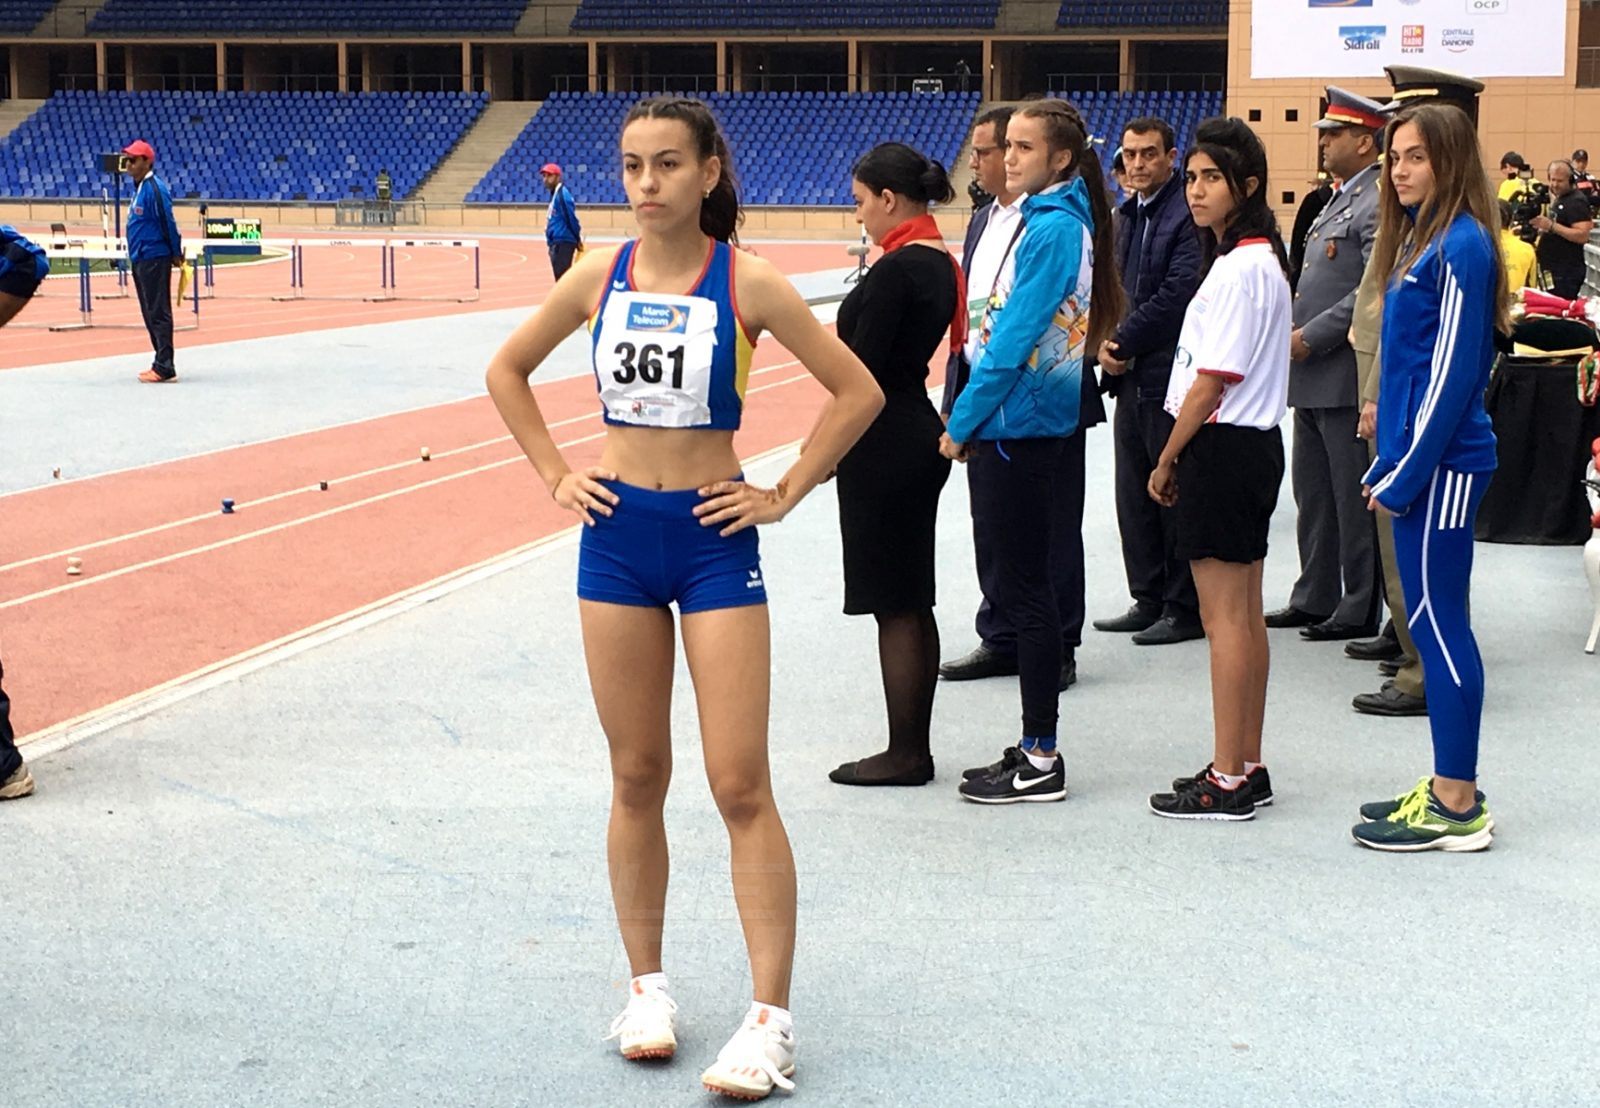 Alexia Ioana Dospin of Romania finished in 5th place, with 11.61m, in the Girls Triple Jump Final at Gymnasiade 2018 in Marrakech / Photo Credit: Yomi Omogbeja